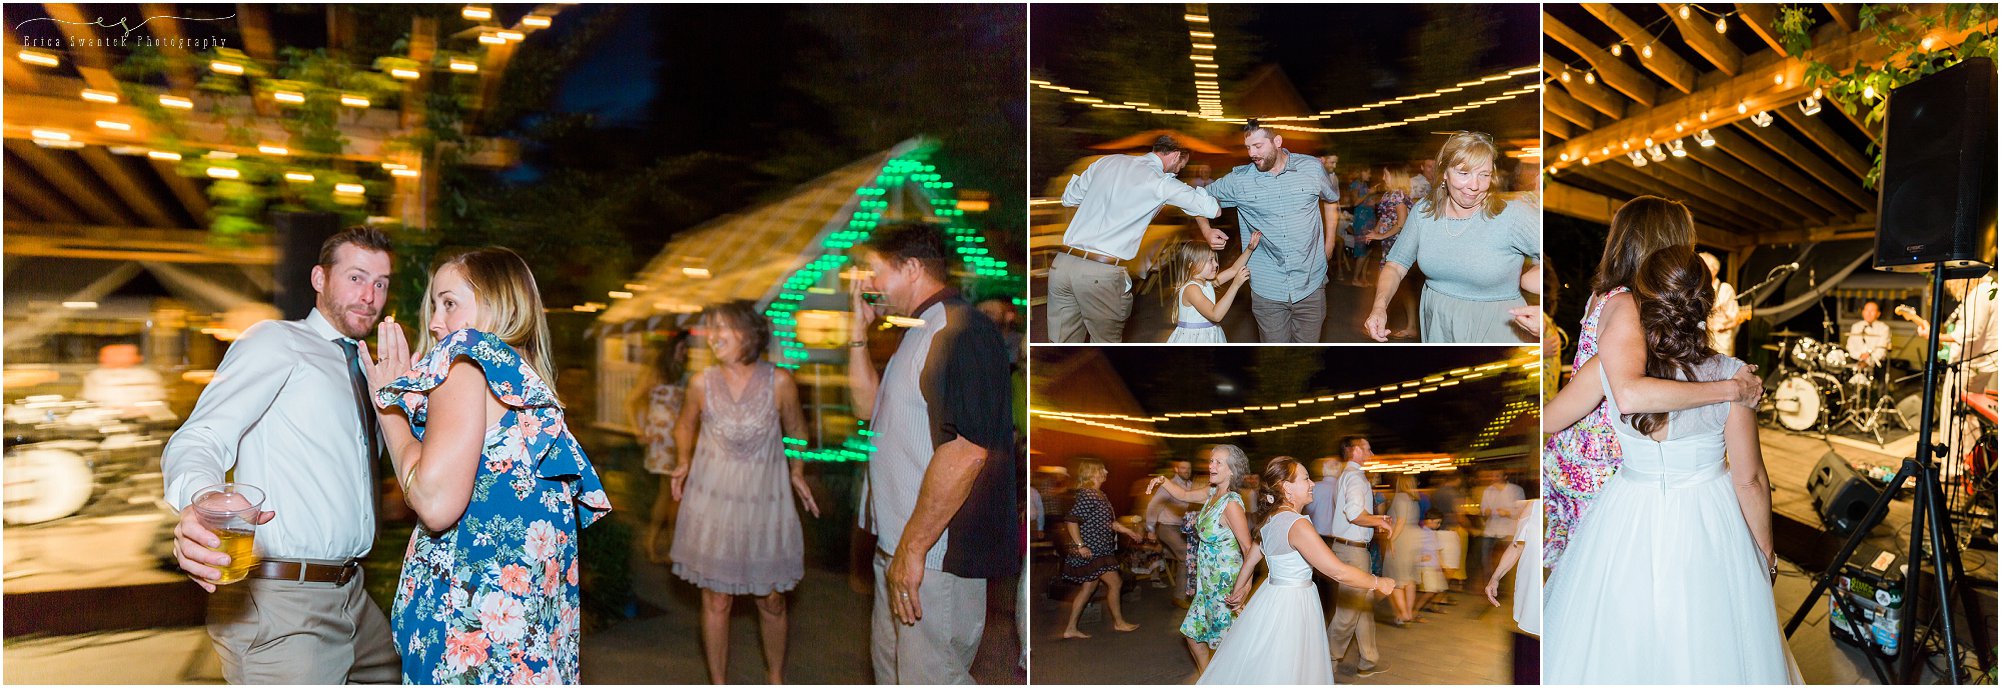 A live band is always so much fun for your Central Oregon wedding reception. | Erica Swantek Photography